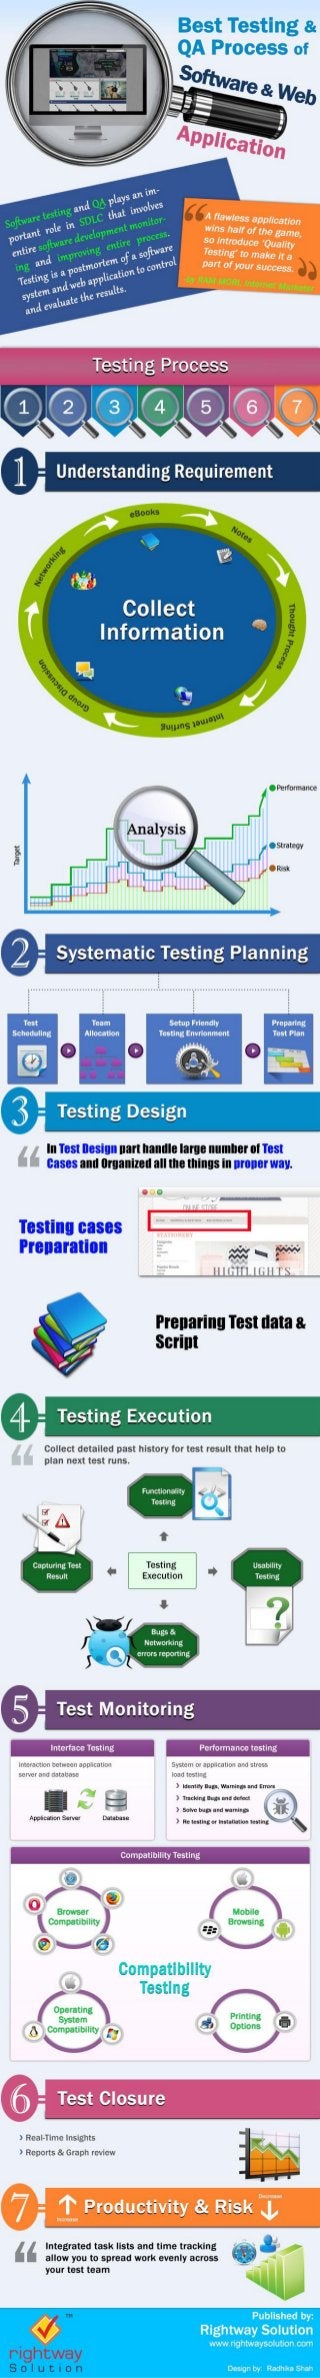 Implement Crucial Process of Software Testing & QA